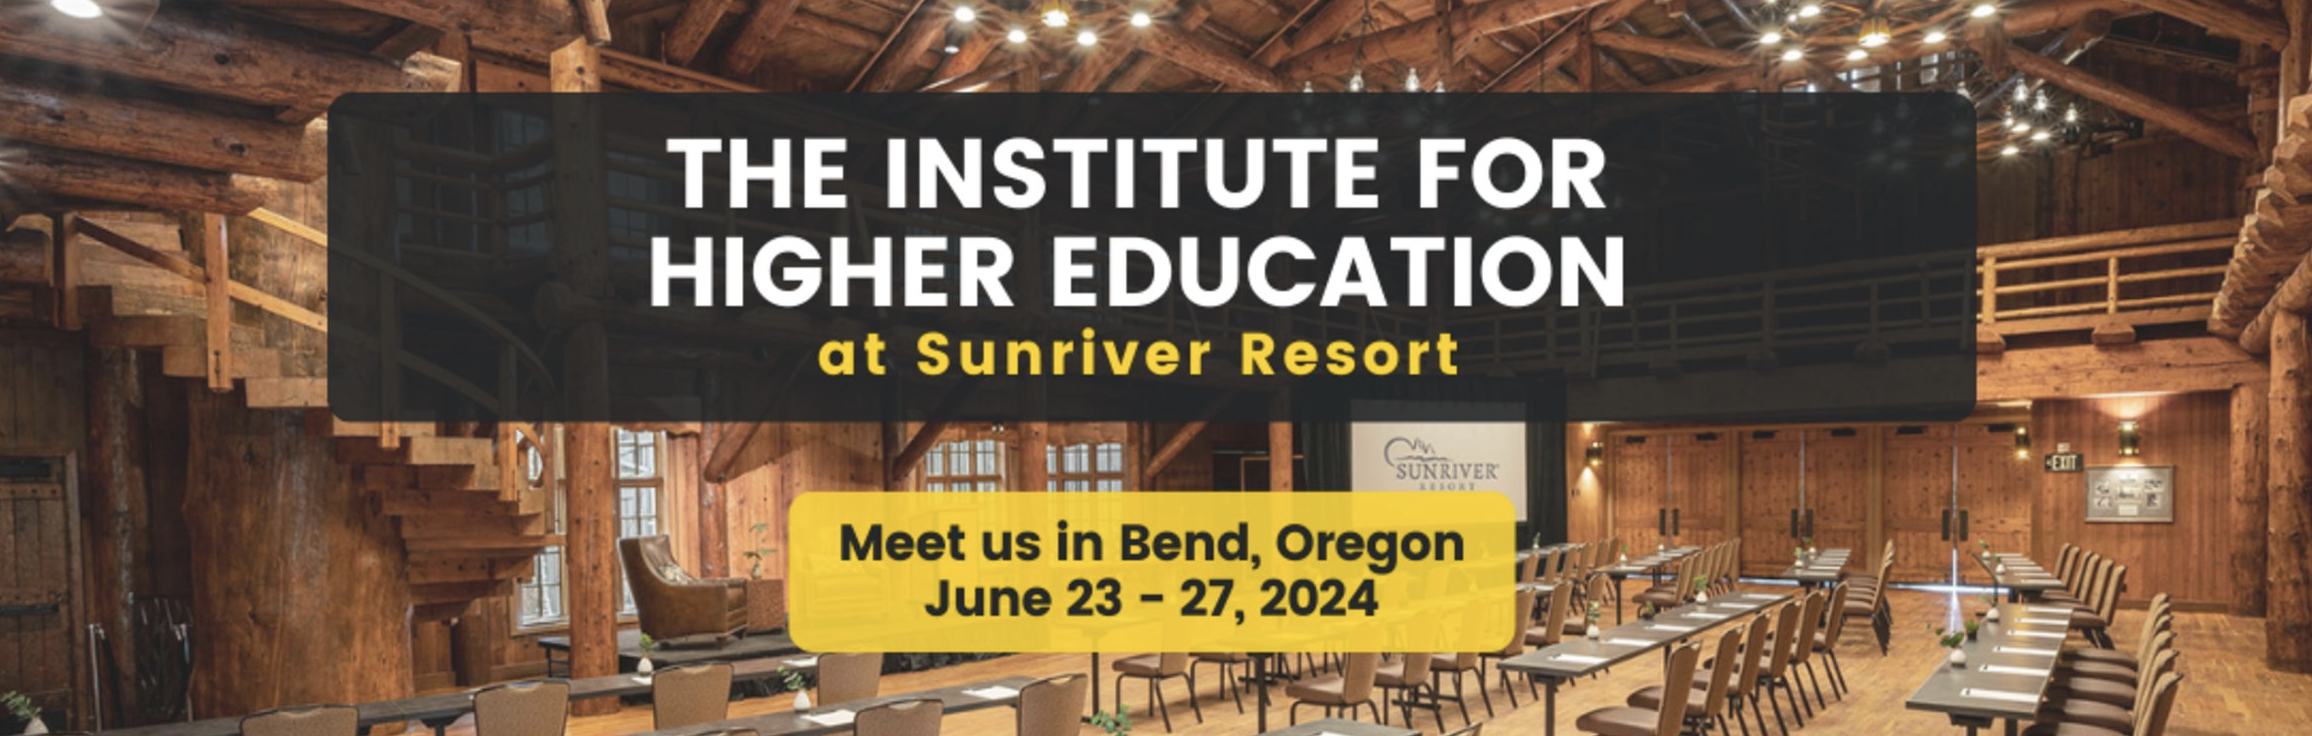 The Institute for Higher Education at Sunriver conference image